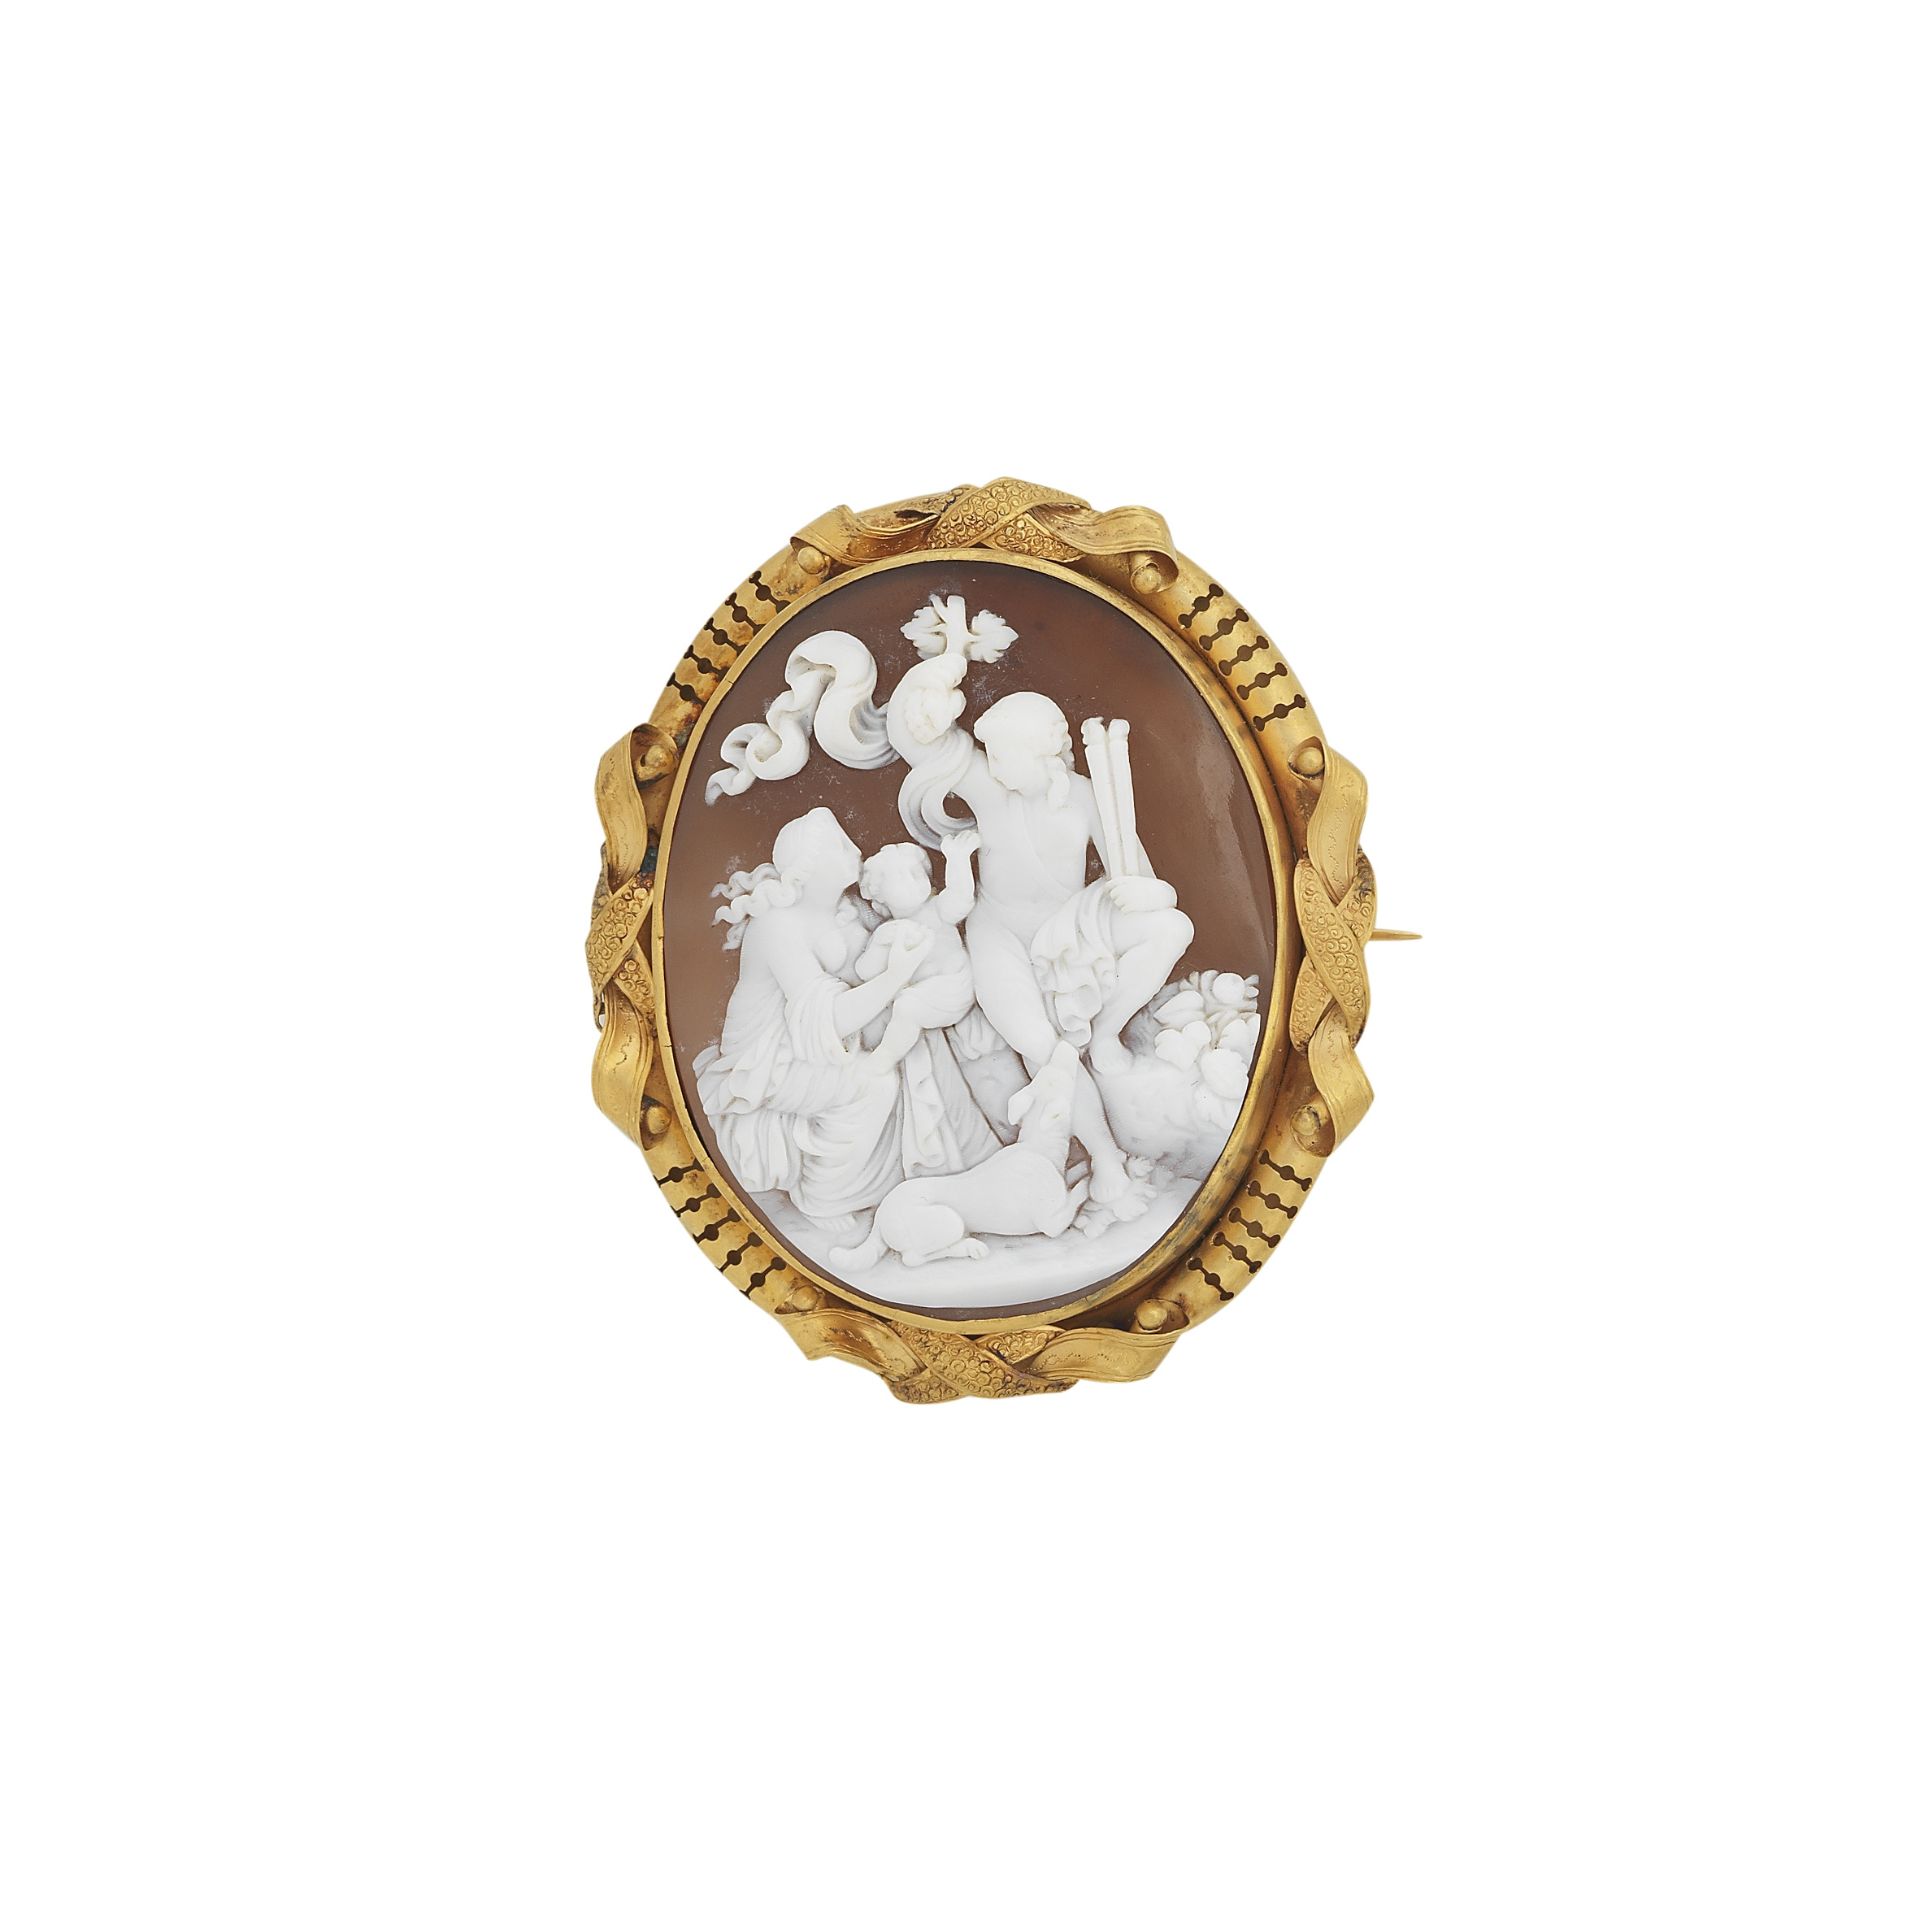 An oval shell cameo brooch, late Victorian